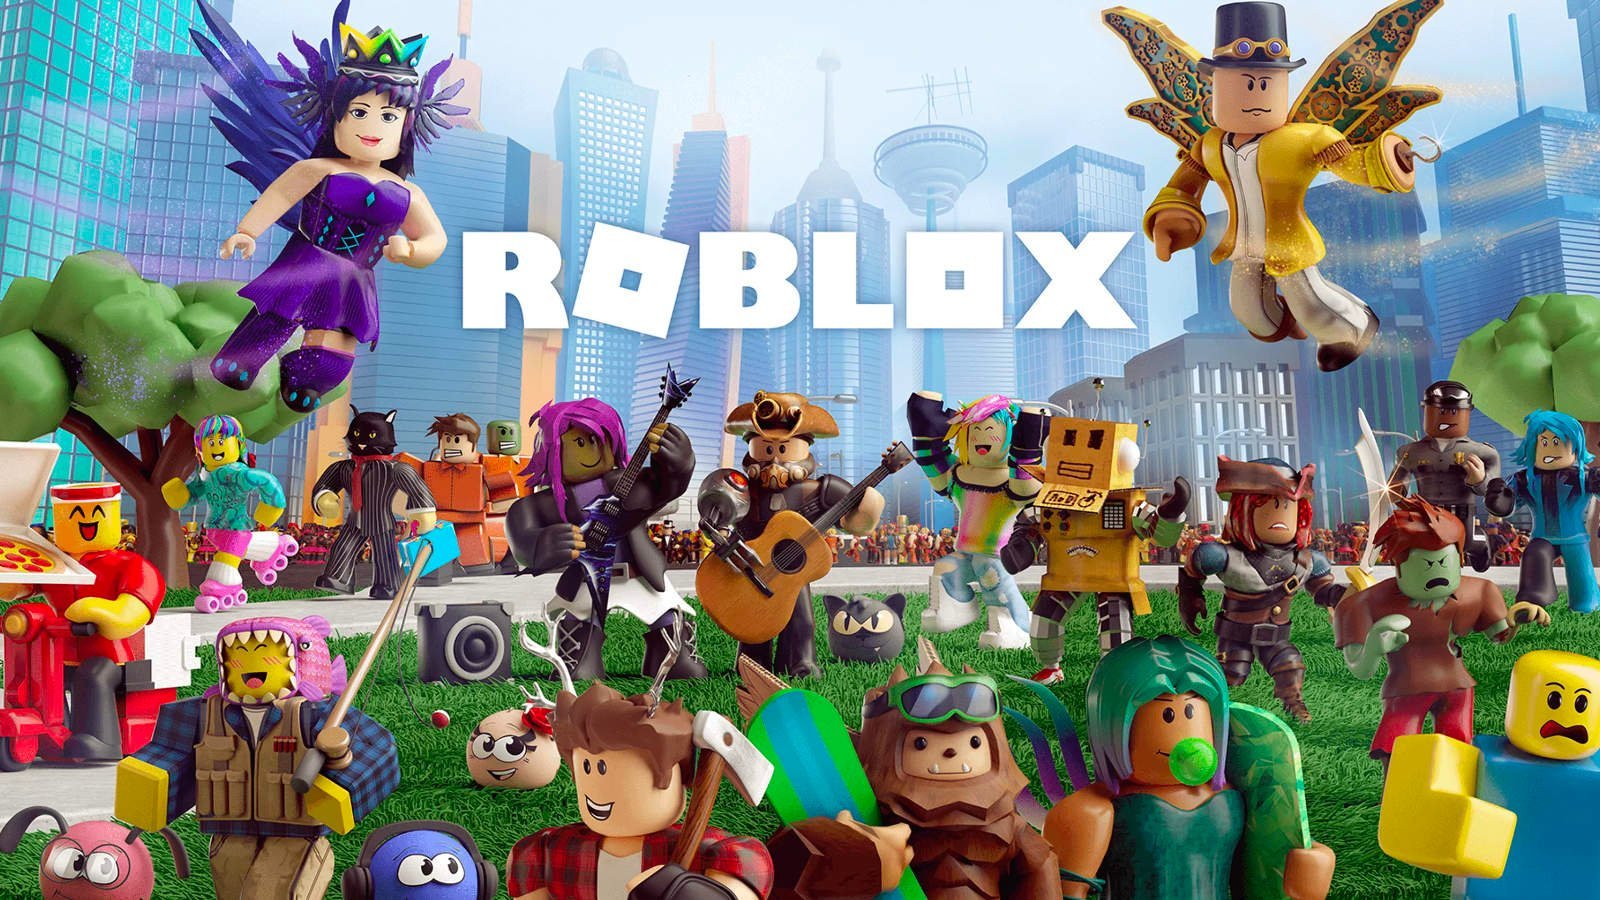 Roblox Promo Codes List Redeem Free Items Robux And Clothes - free roblox codes list 2018